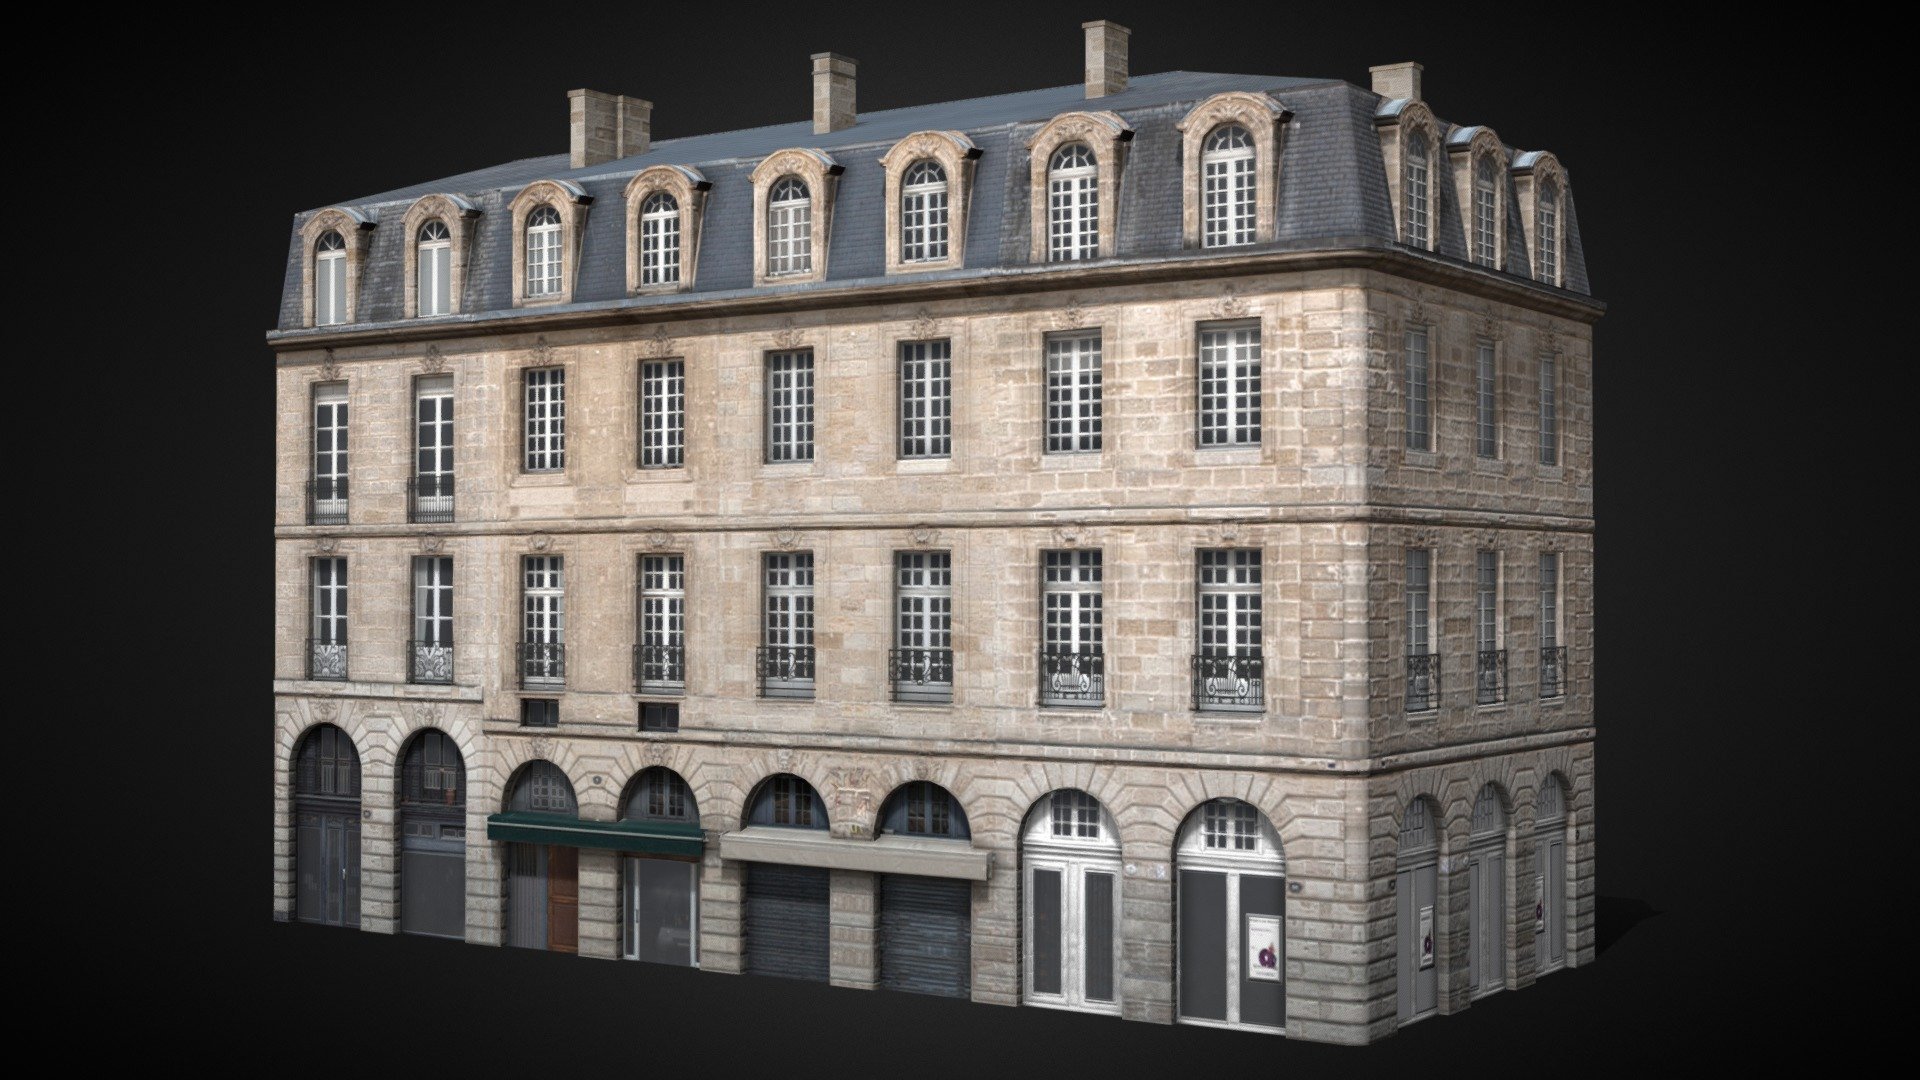 Custom low-poly asset made with Blender and Gimp for the Cities: Skylines video game. Available on the Steam Workshop here: https://steamcommunity.com/sharedfiles/filedetails/?id=2099741510 - Bordeaux Flat 2 corner [France] - Download Free 3D model by Lost Gecko (@Lost_Gecko) 3d model